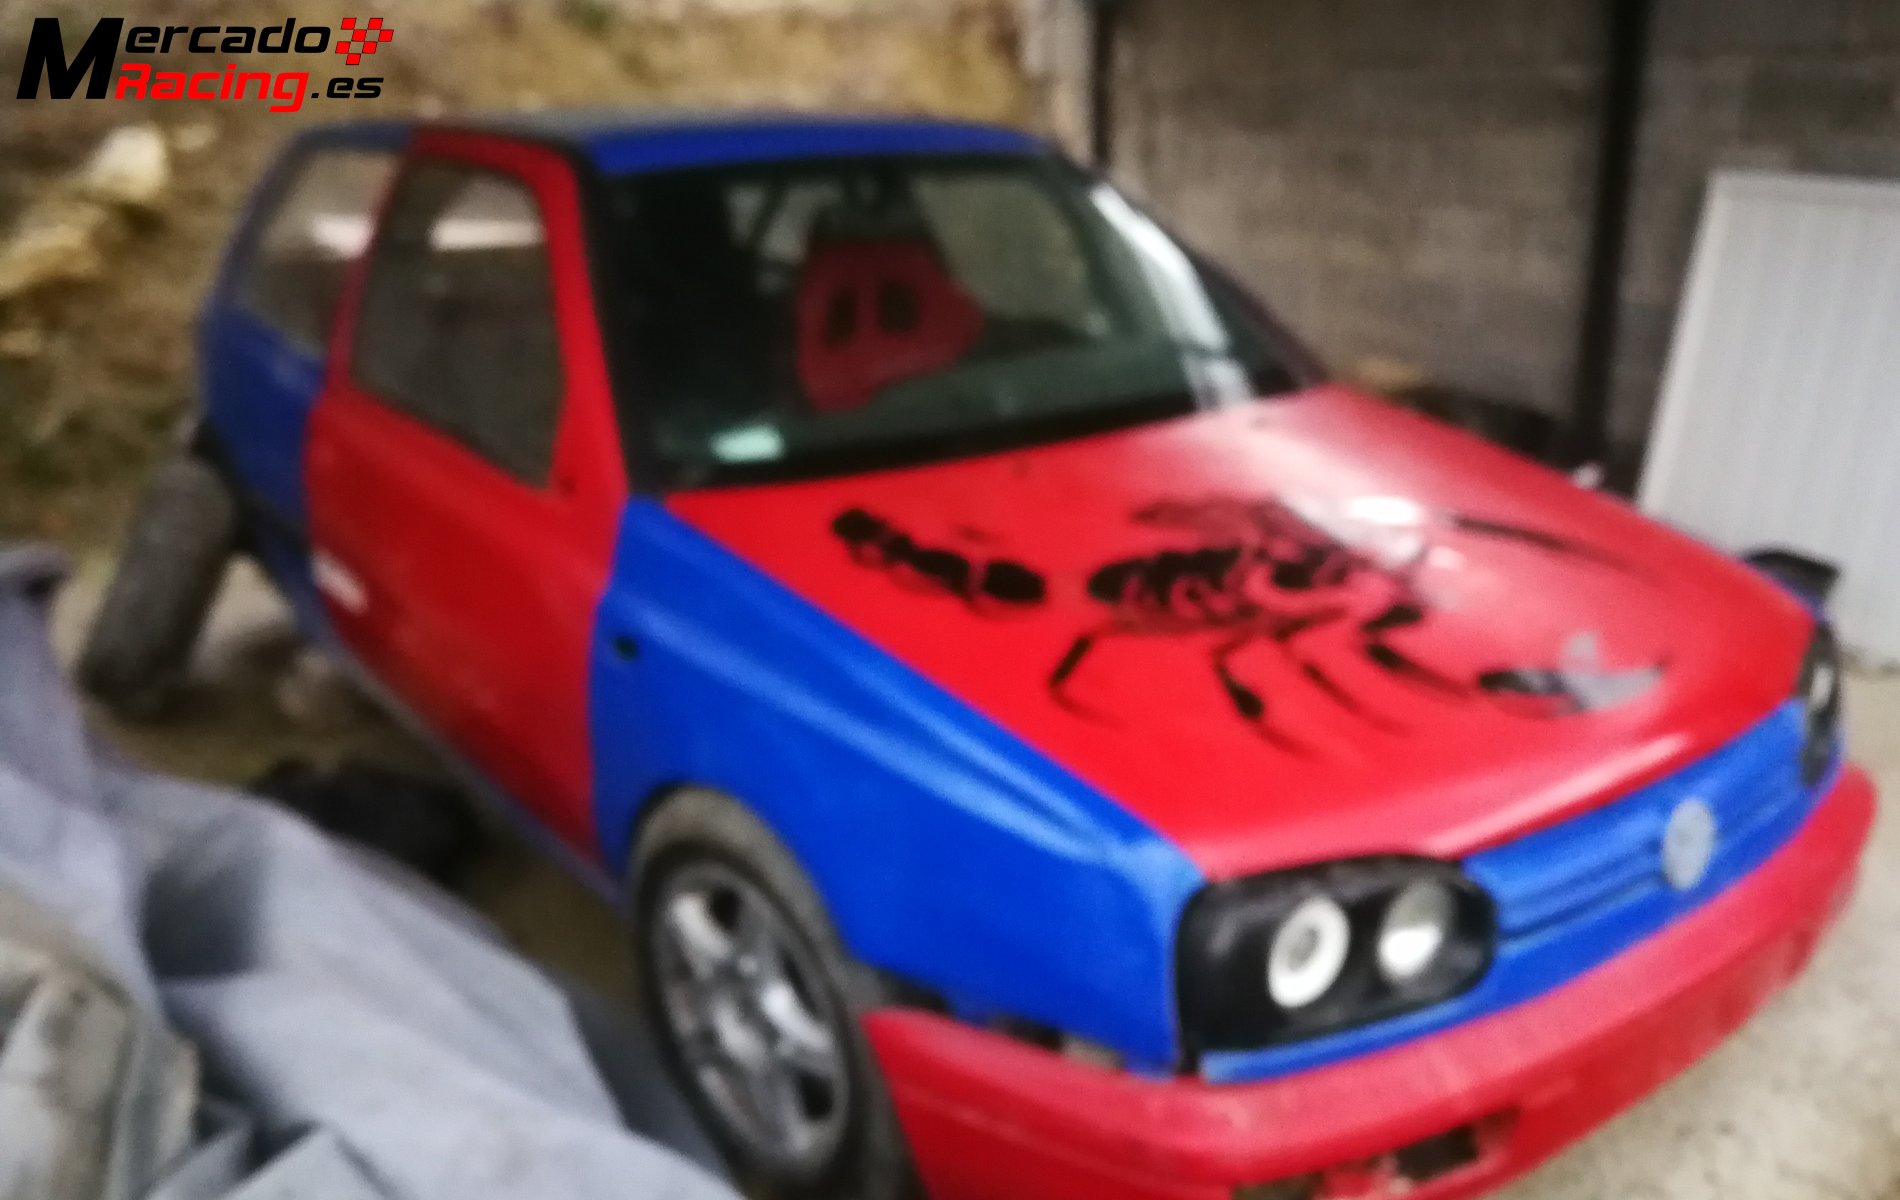 Golf 3 gti proyecto